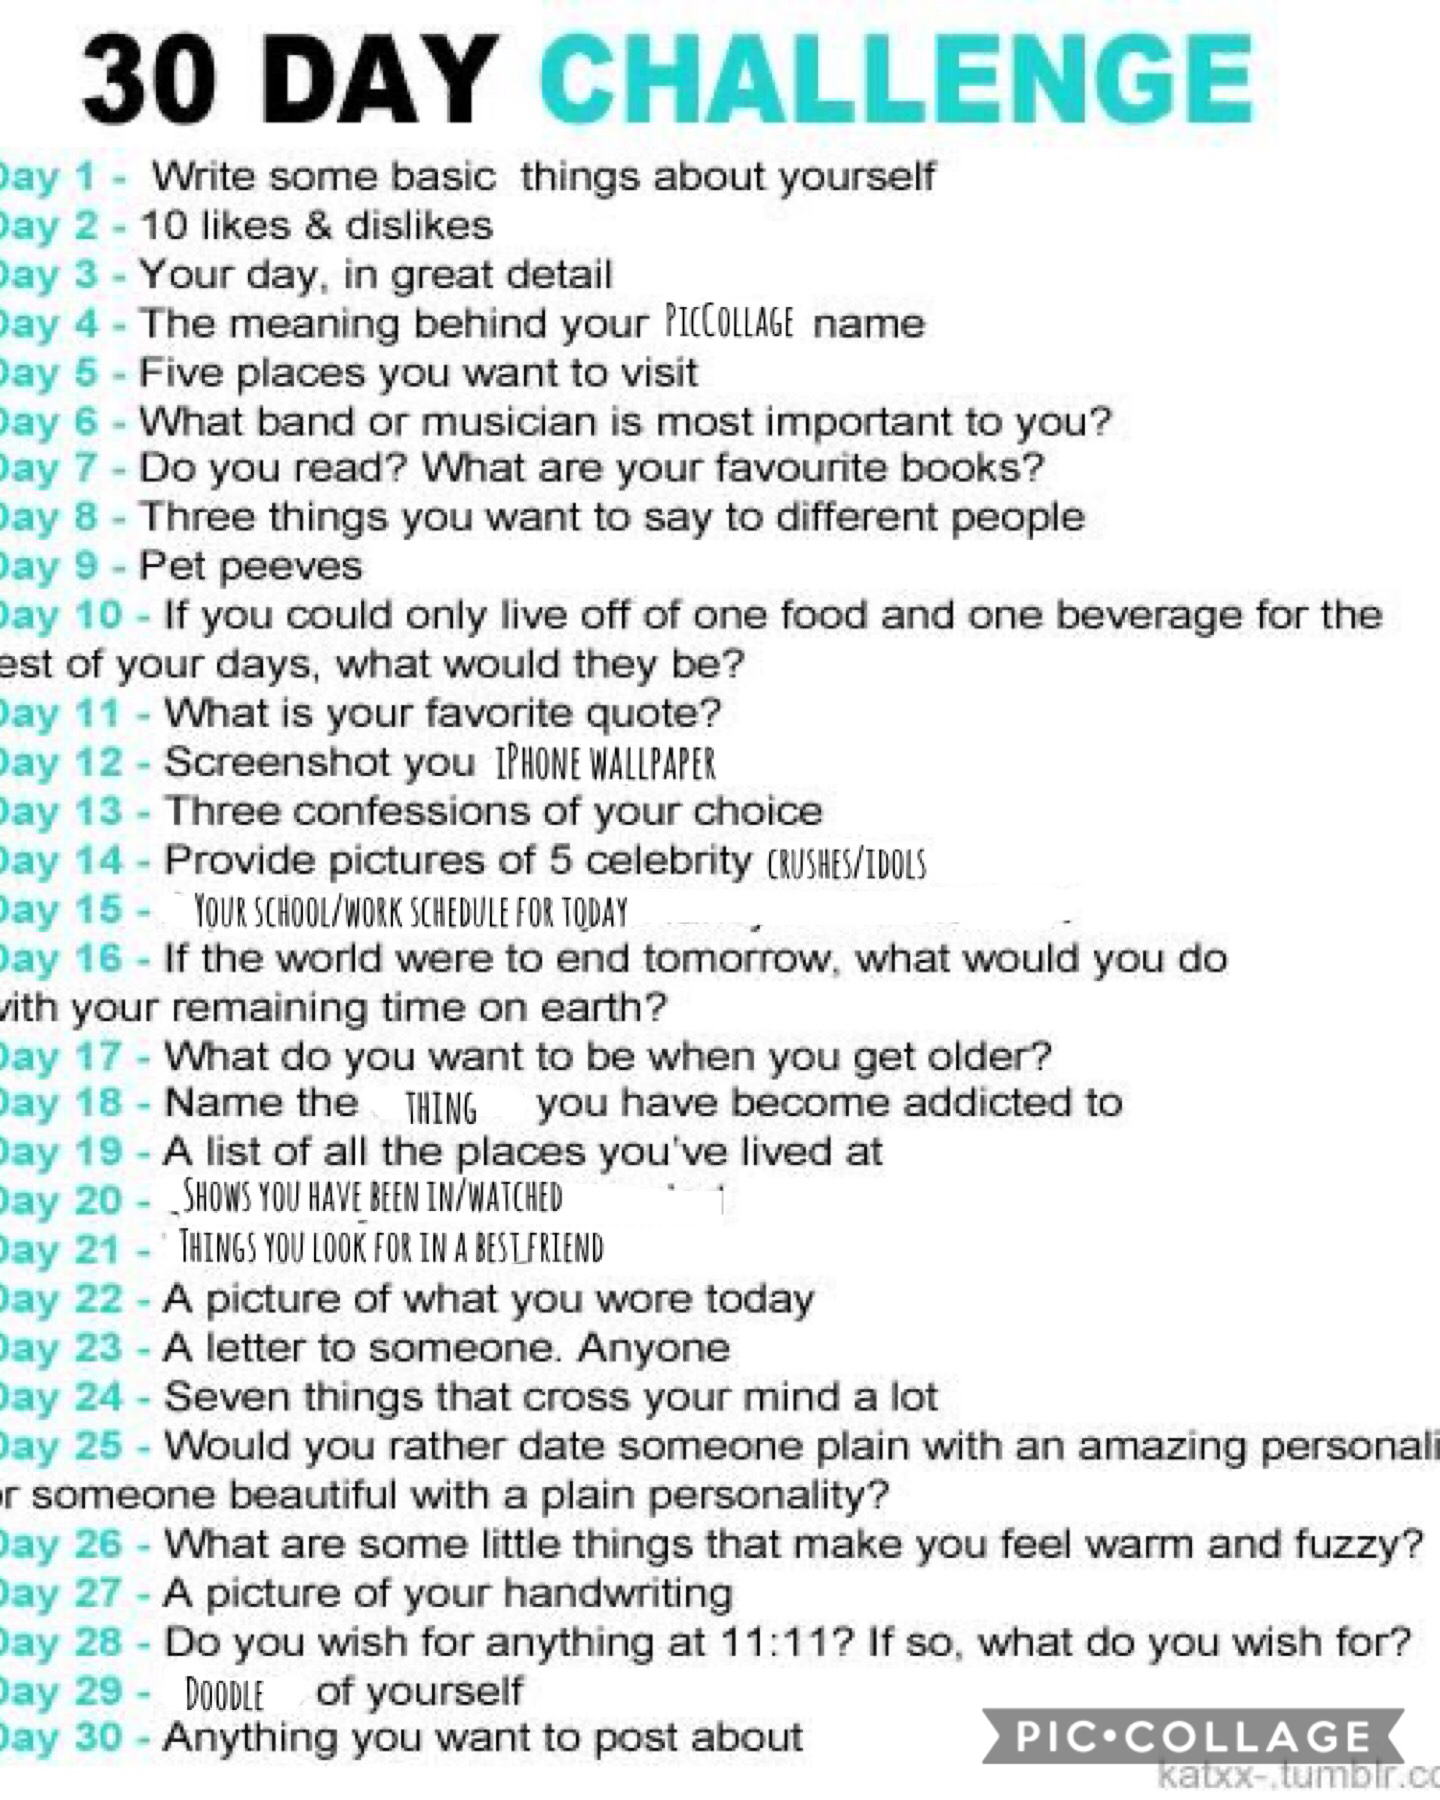 Decided that I’ll start doing this!! Edited a little so that I can answer them all but mostly the same!! Will start tomorrow, looking forward to it!! Do it with me day by day if you like!! X